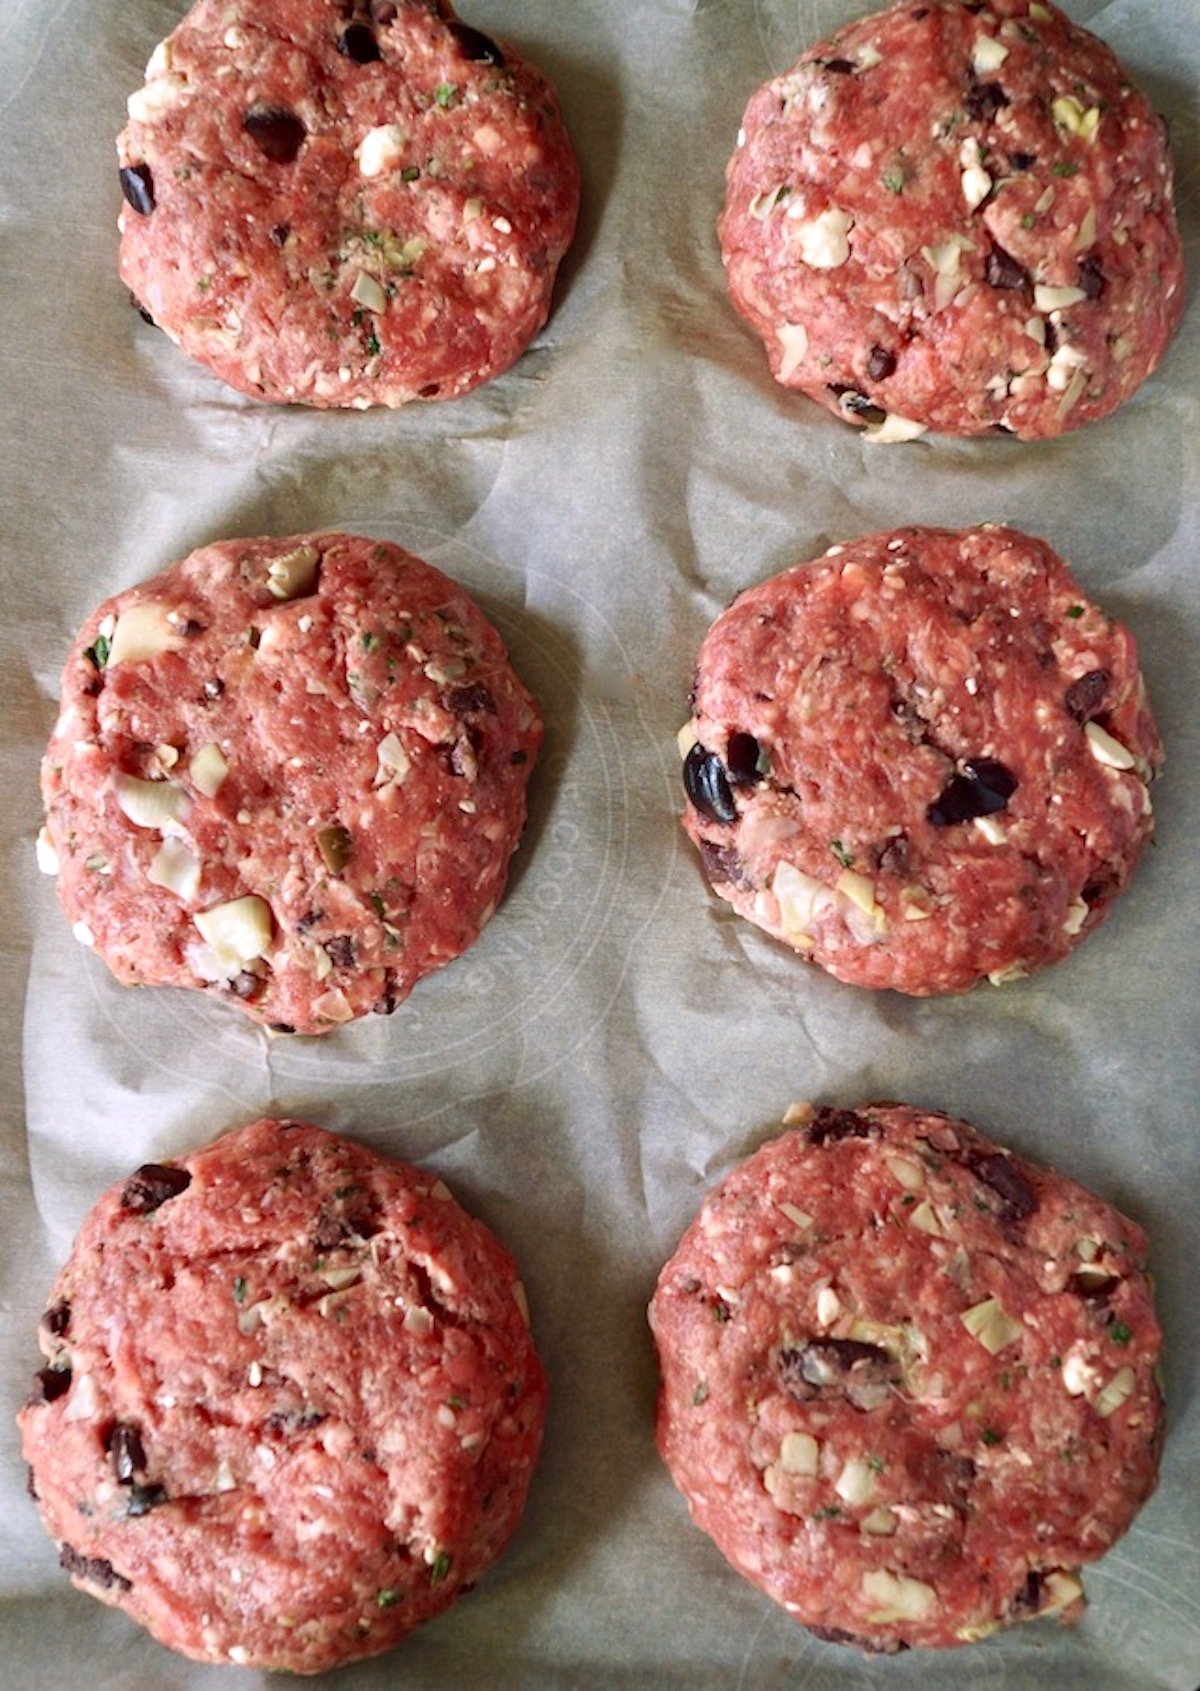 Six raw, shaped beef burgers with black olives and feta cheese.